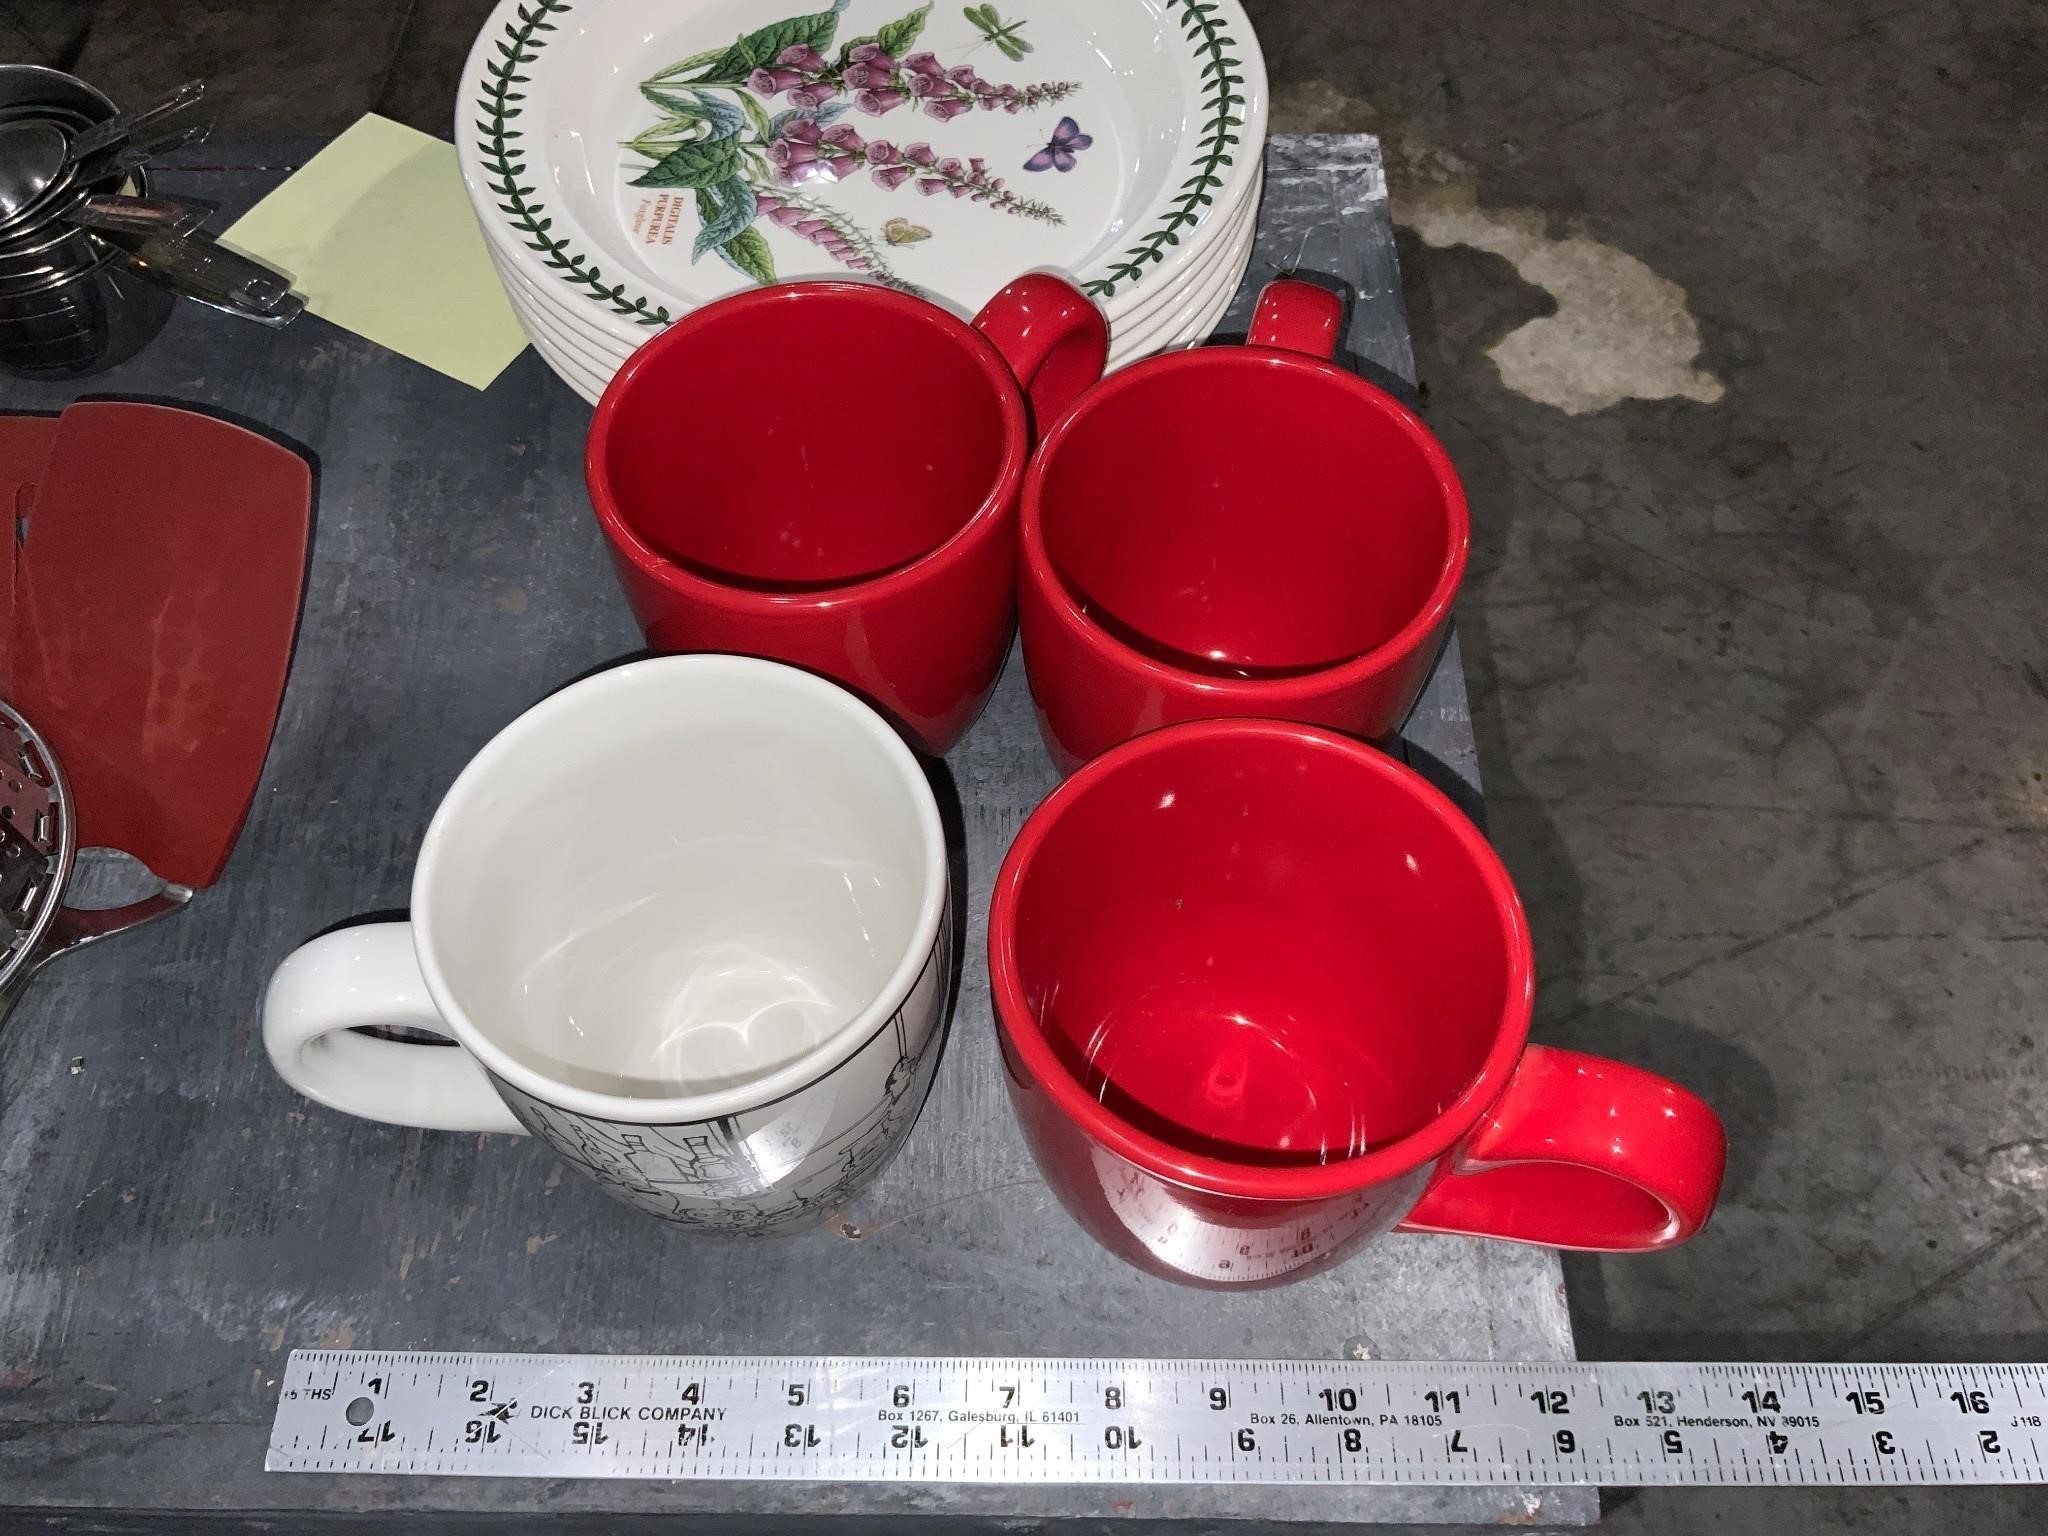 lot of 4 cups large mugs red and black and white